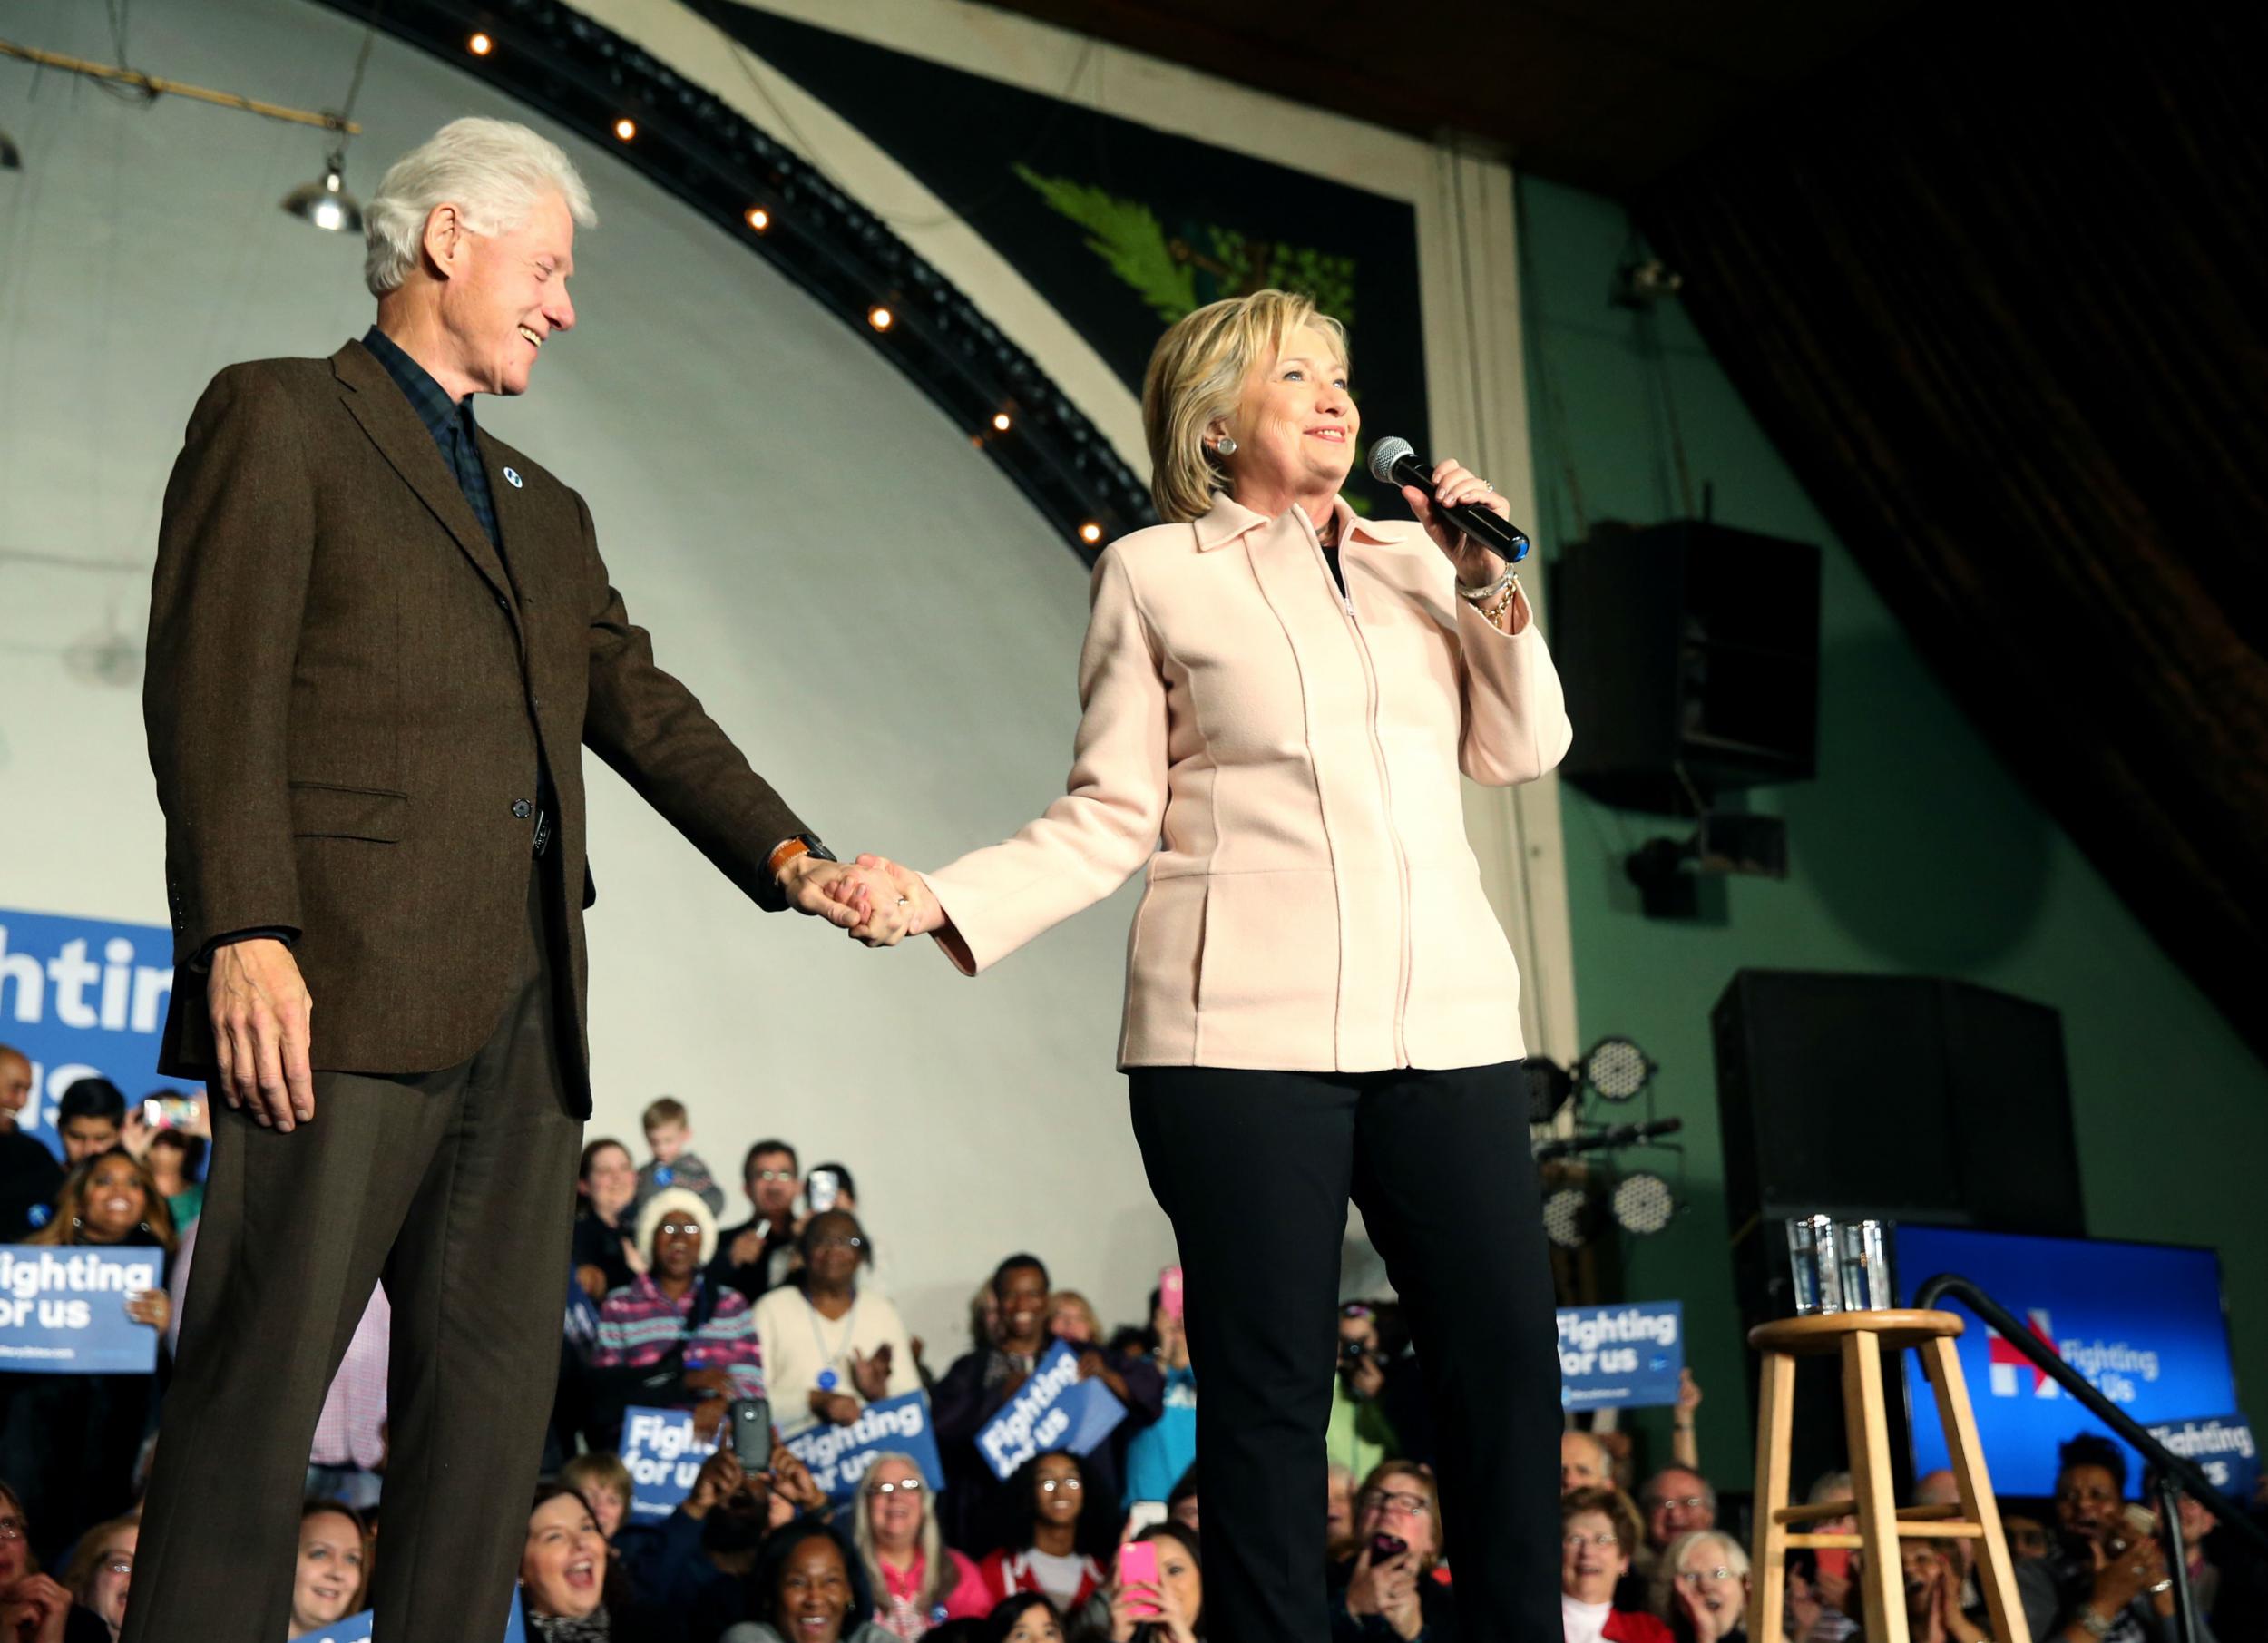 Mr Clinton spent ten minutes introducing his wife to the crowd in Davenport